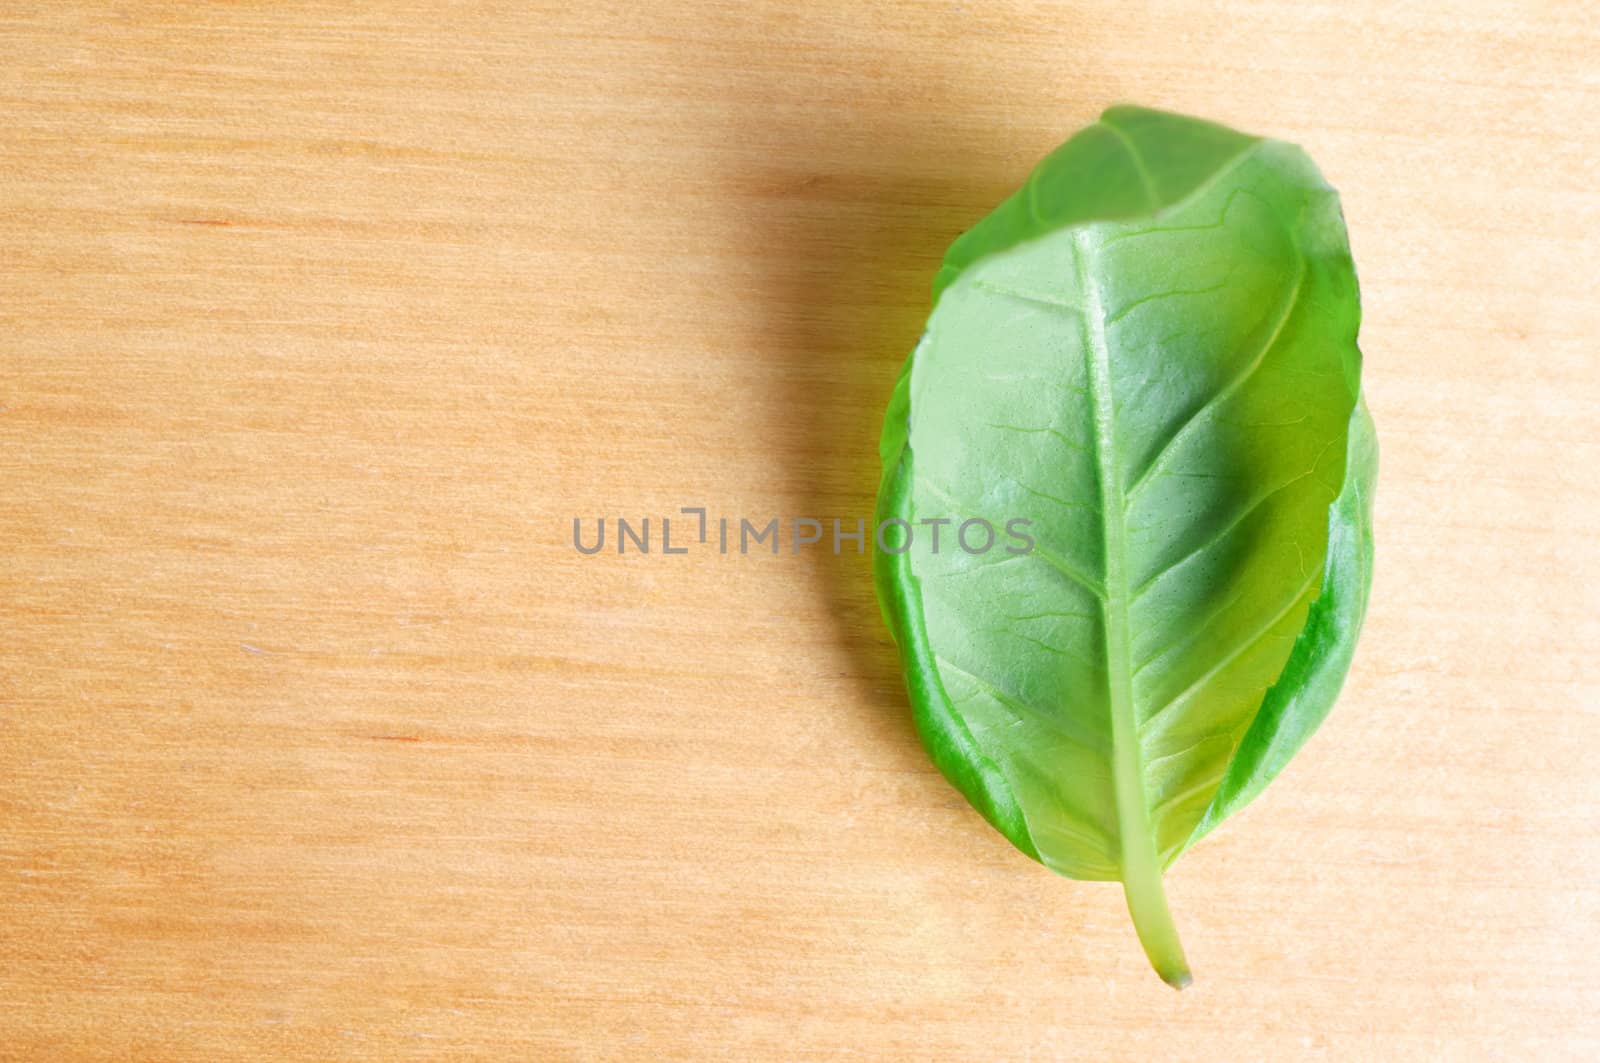 Overhead shot of a solitary basil leaf, inner side facing uppermost on a light wood surface, with copy space to the left.